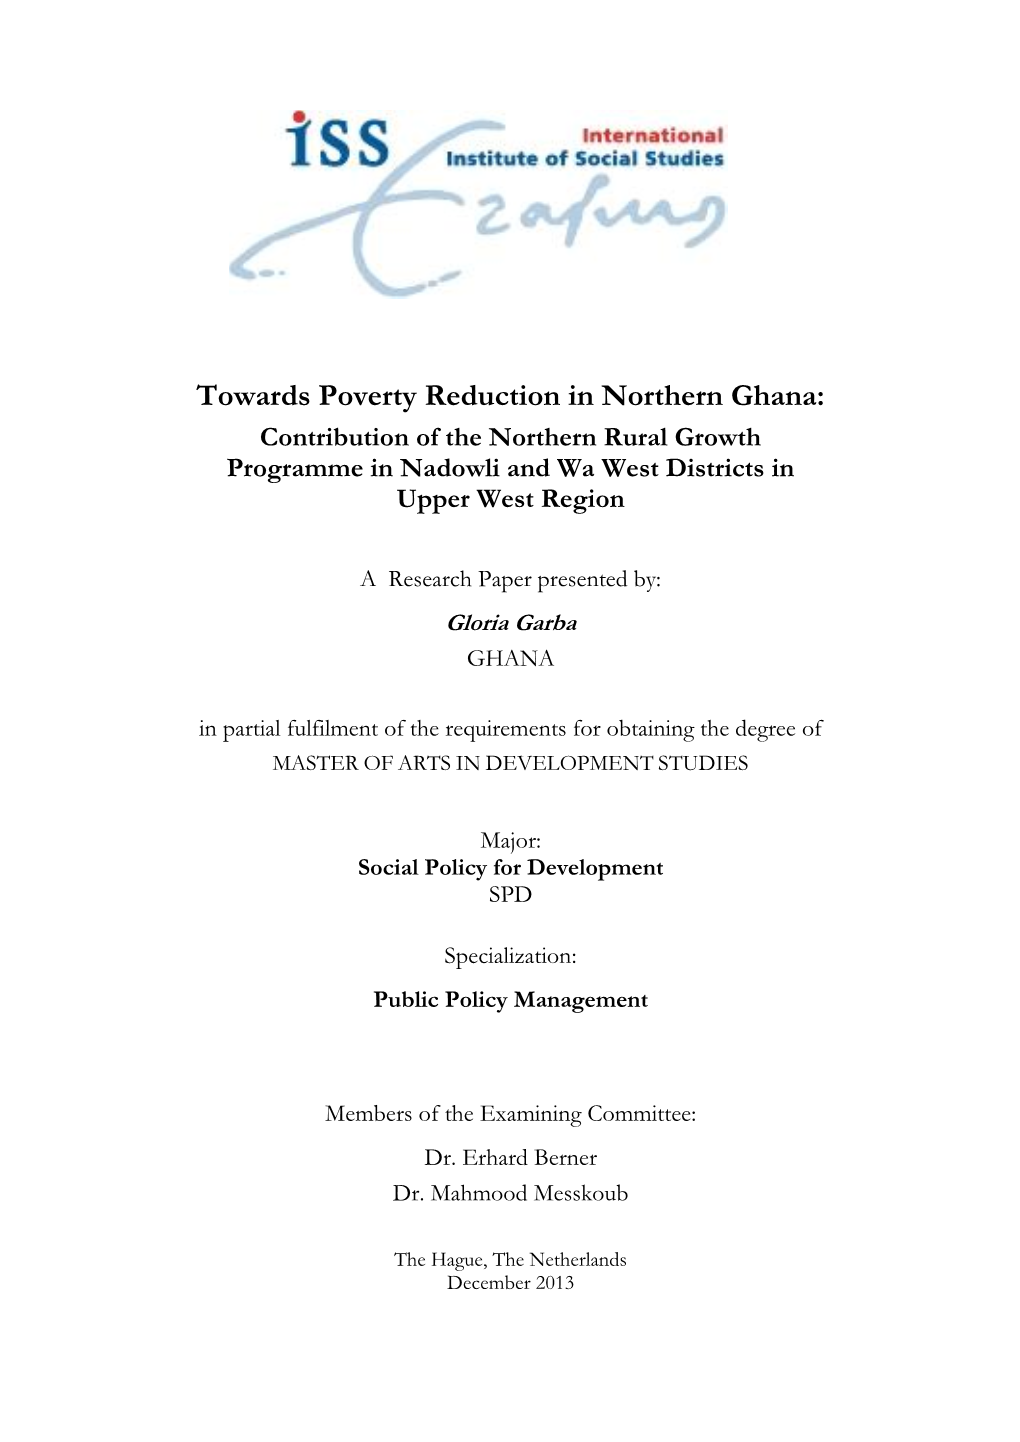 Towards Poverty Reduction in Northern Ghana: Contribution of the Northern Rural Growth Programme in Nadowli and Wa West Districts in Upper West Region